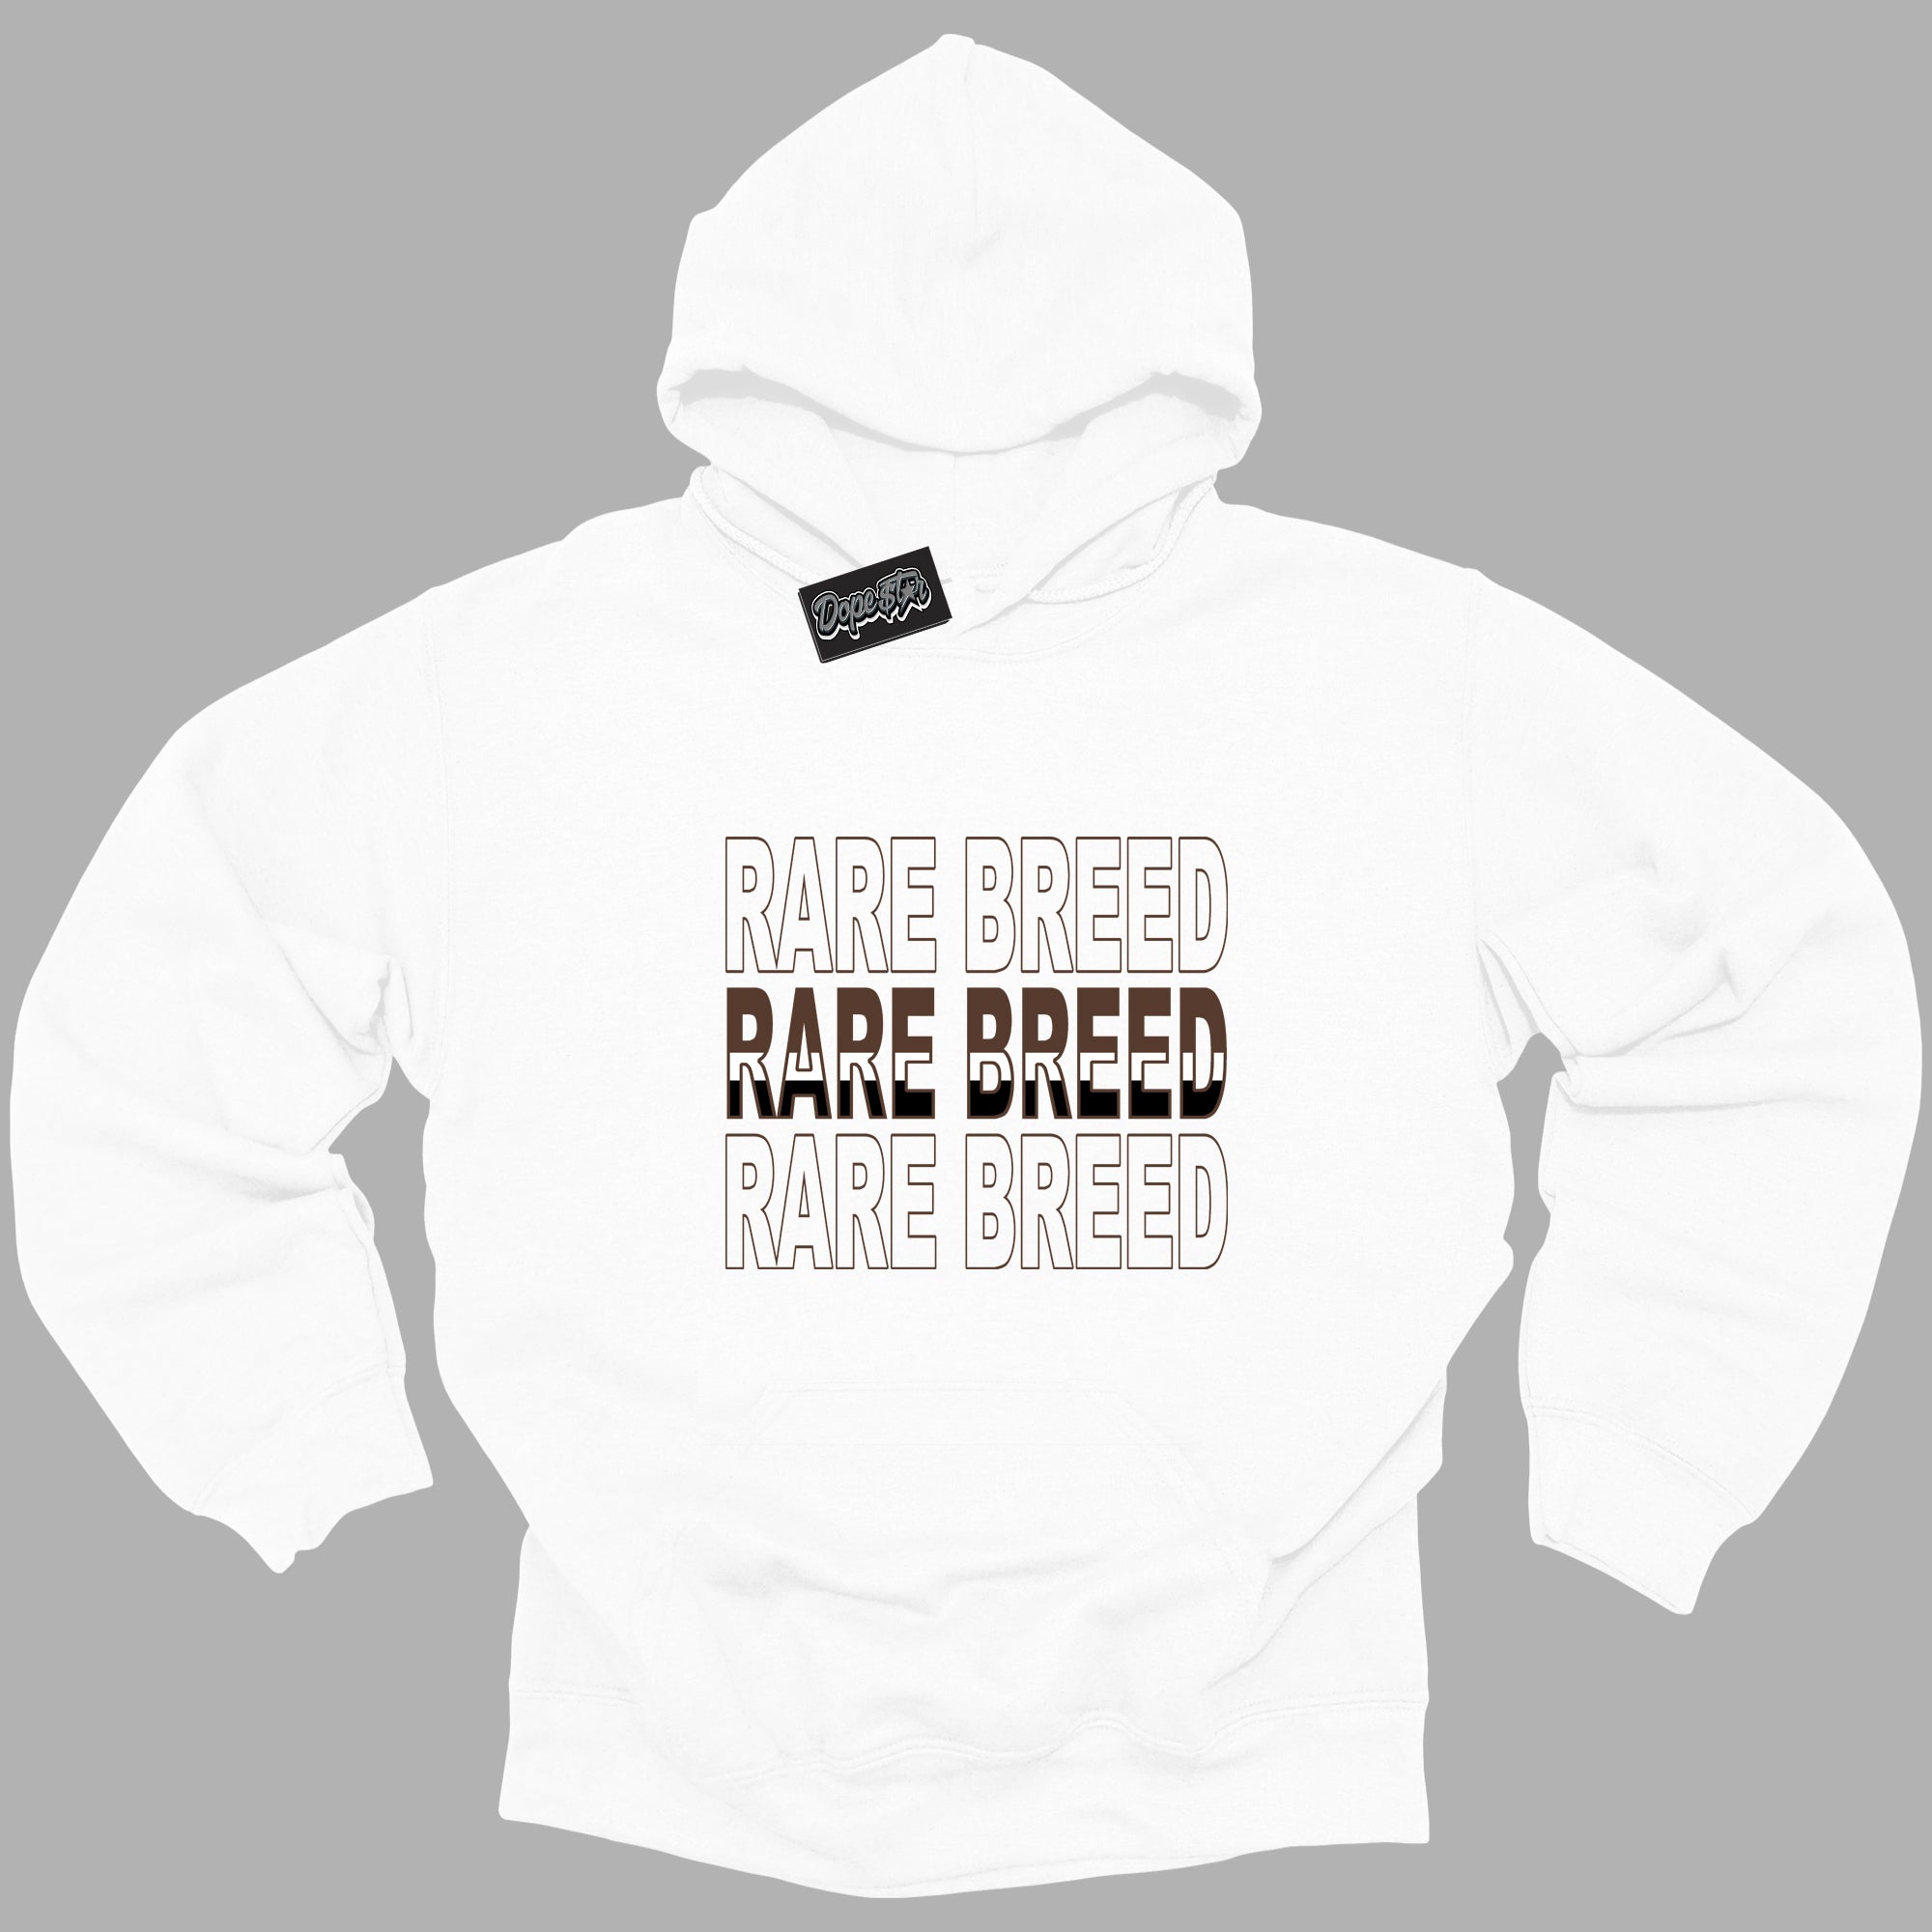 Cool White Graphic DopeStar Hoodie with “ Rare Breed “ print, that perfectly matches Palomino 1s sneakers